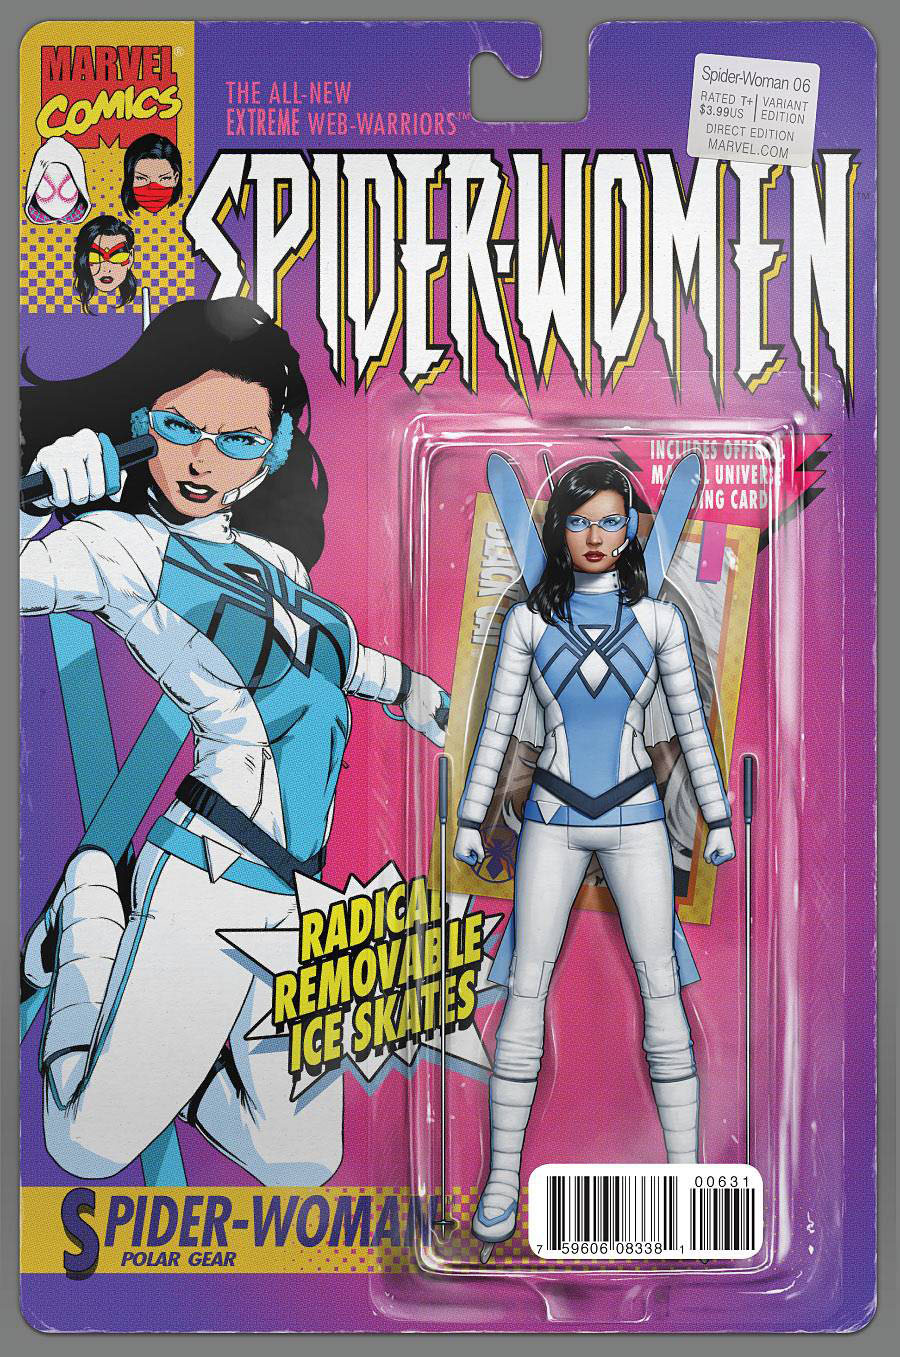 Spider-Woman Vol 6 #6 Cover C Variant John Tyler Christopher Action Figure Cover (Spider-Women Part 4)